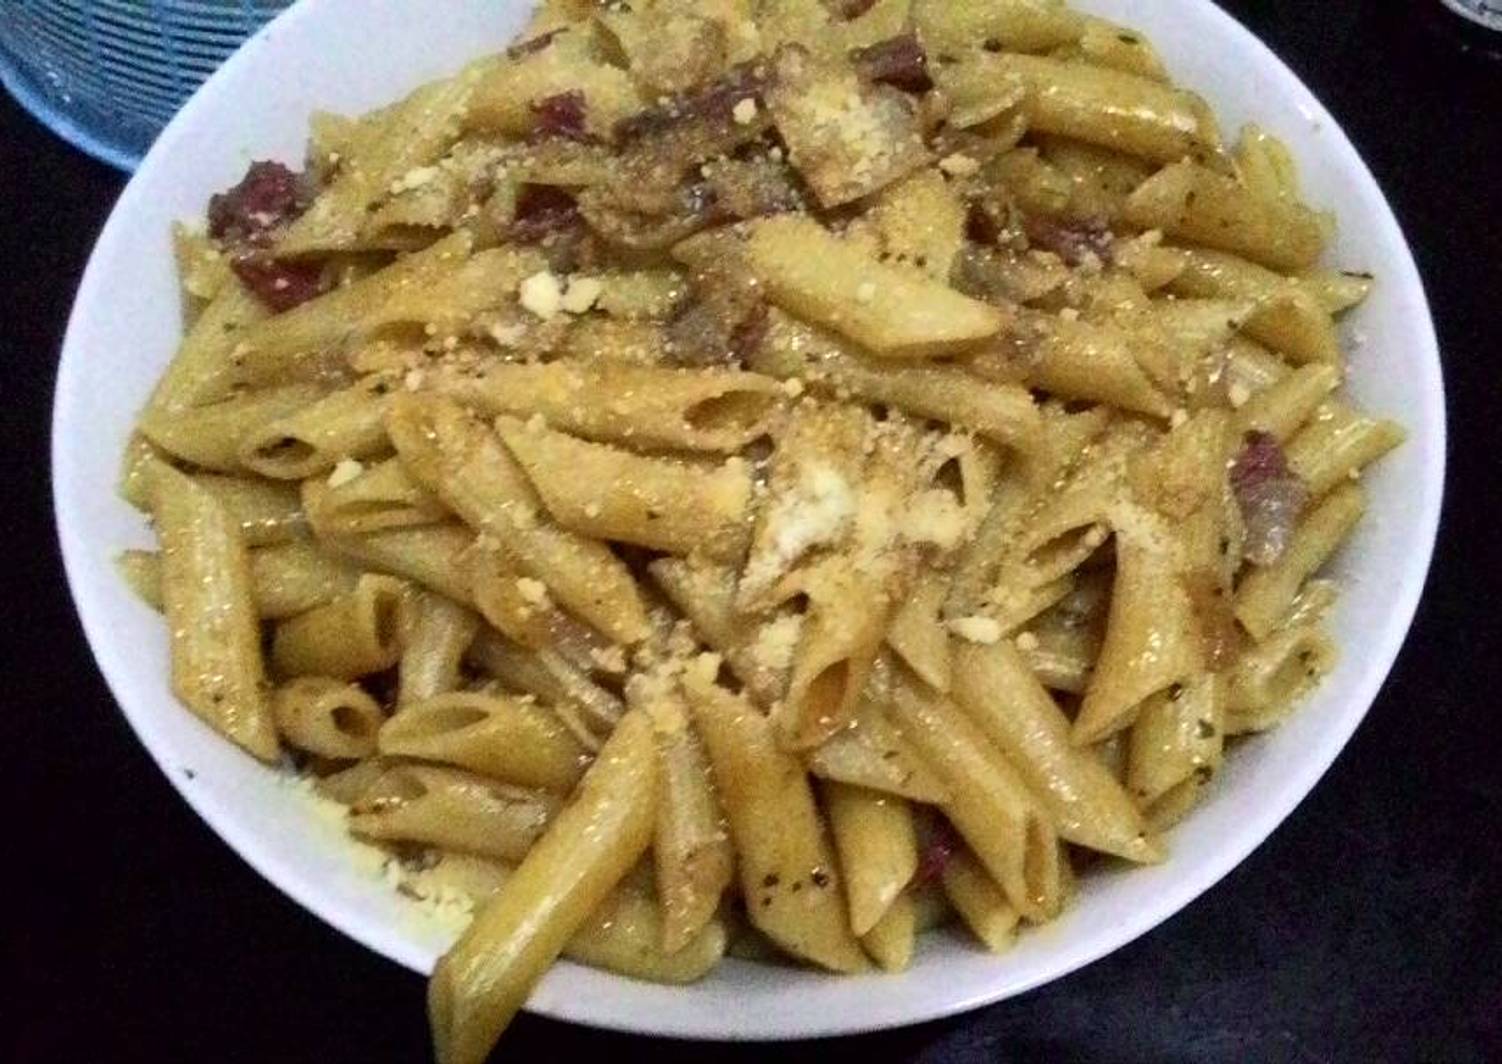 Resep Penne saus barbeque oleh GreenGypsy - Cookpad